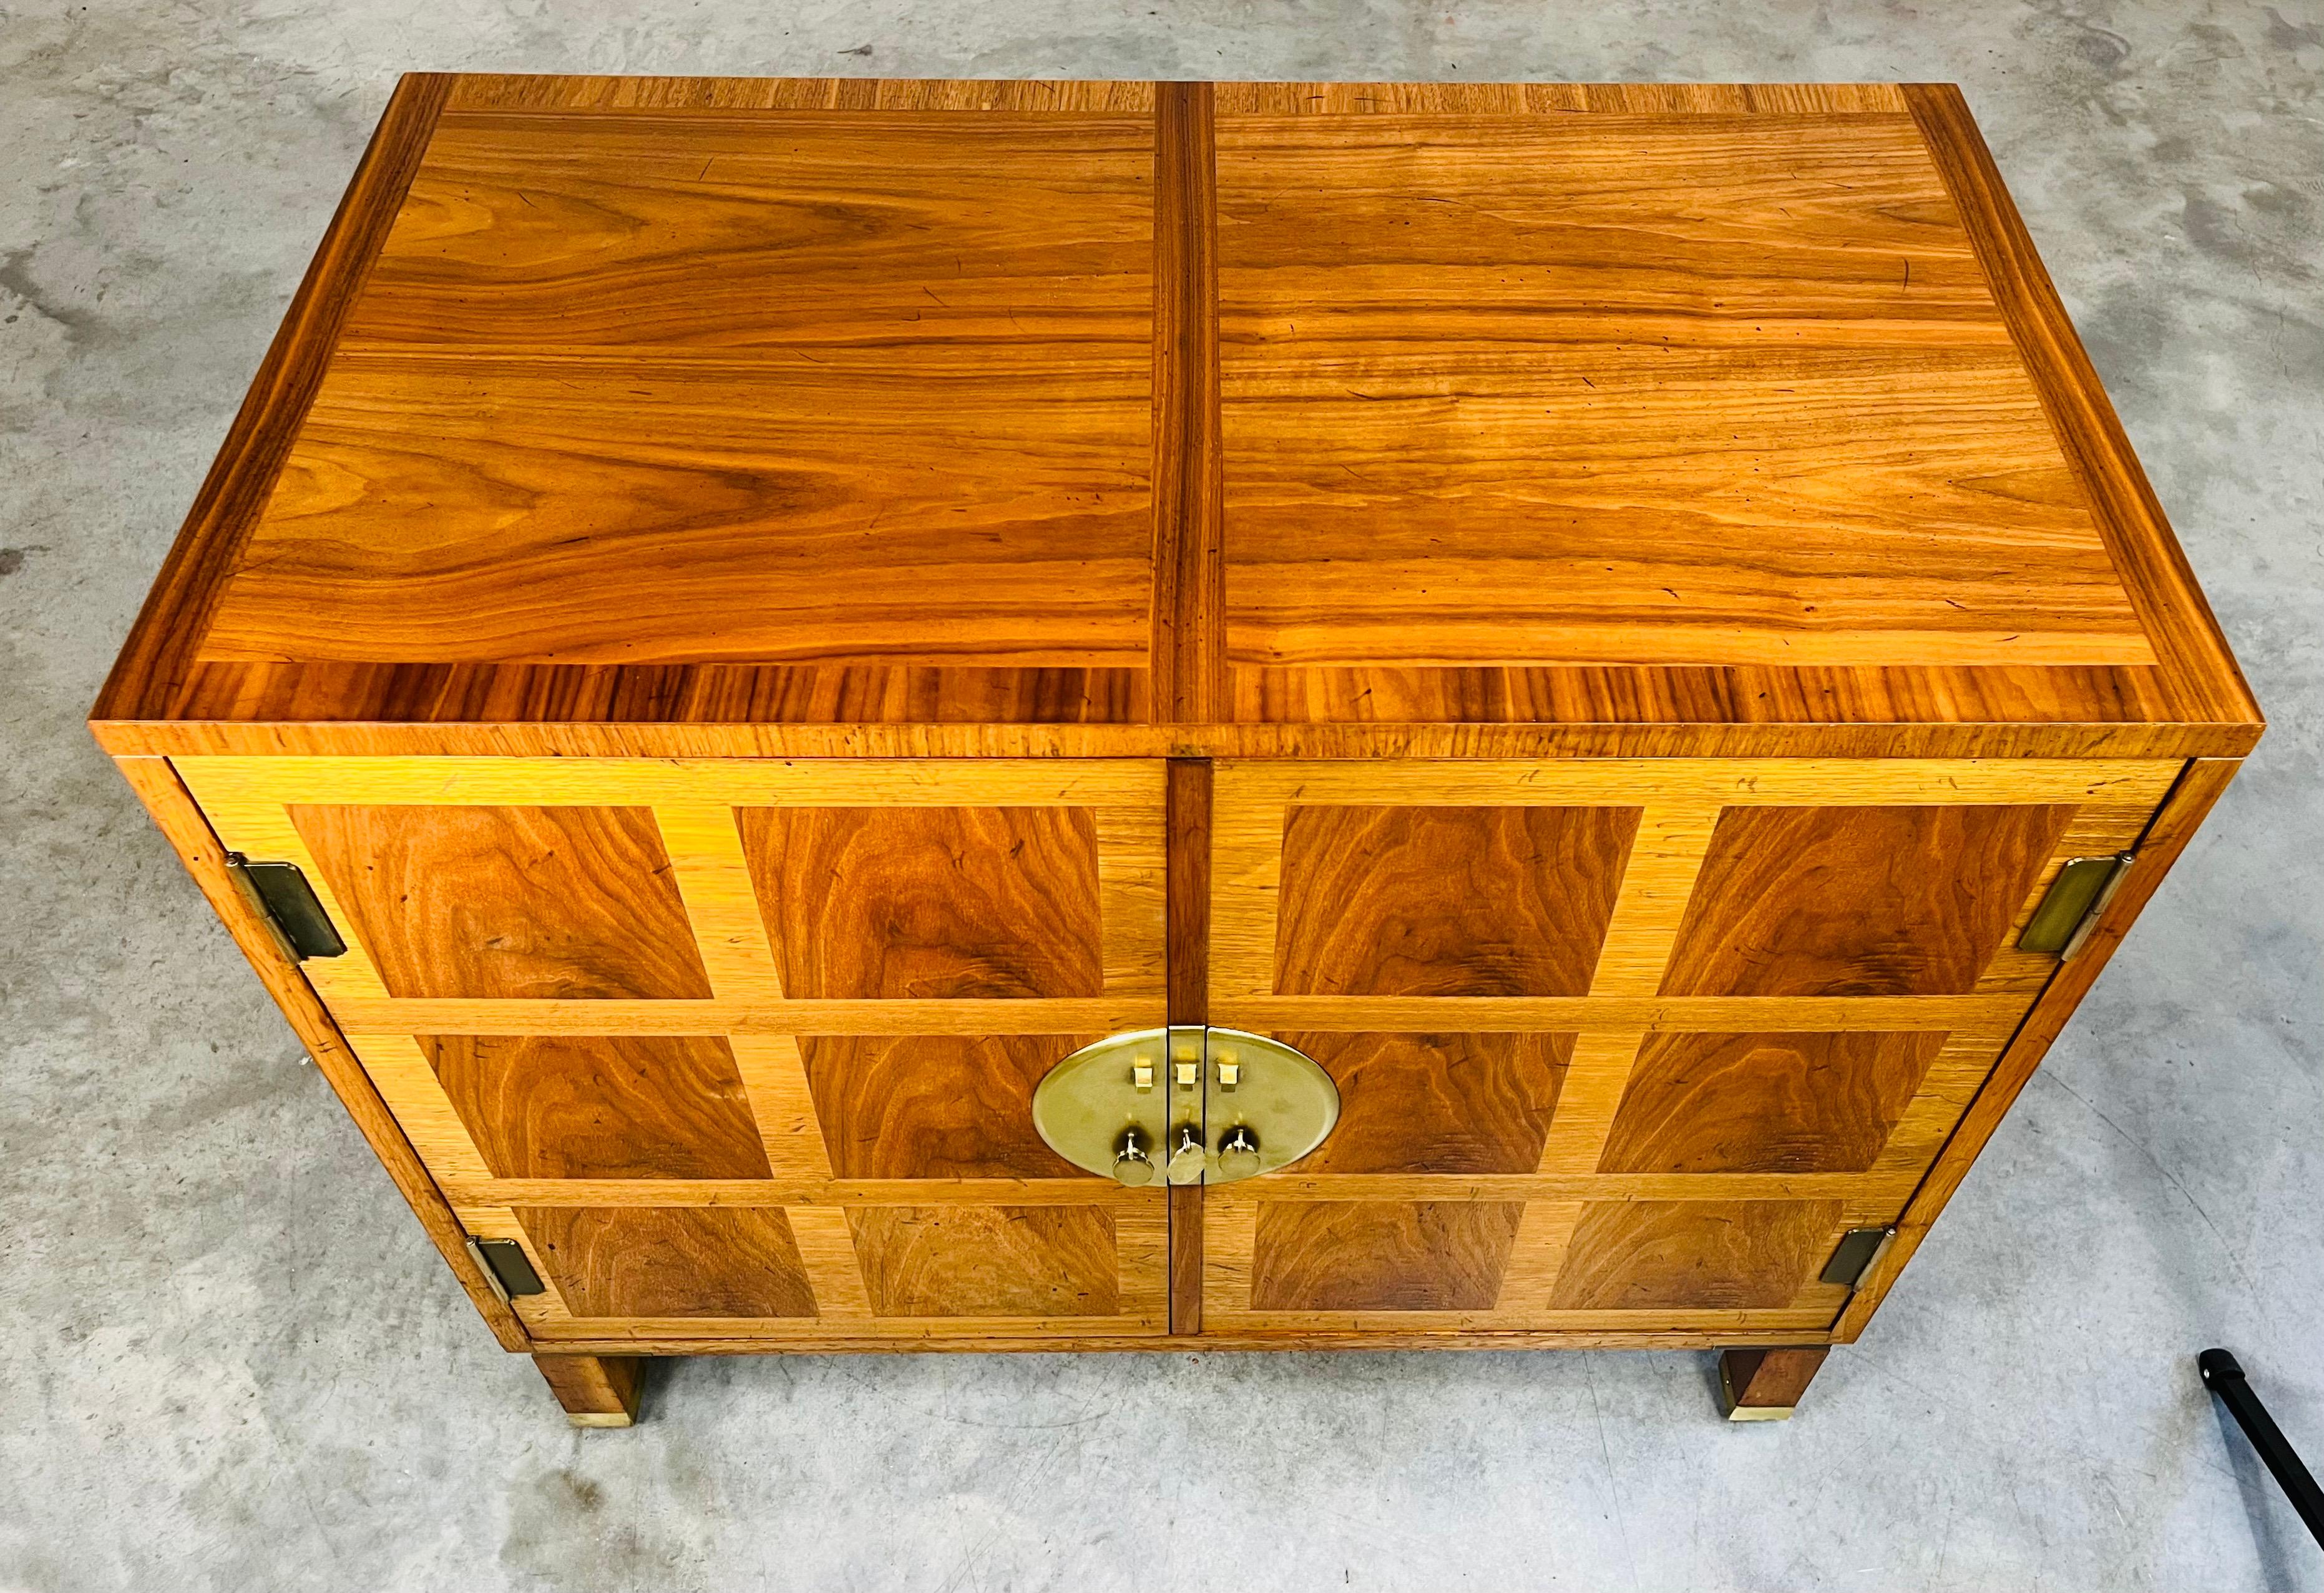 A beautiful Asian inspired banded walnut server having brass pulls with decorative back plates by Baker Milling Road model 6250. North America circa 1970. In beautiful condition with polished brass and refinished case. Boasting vibrant inlay & mixed